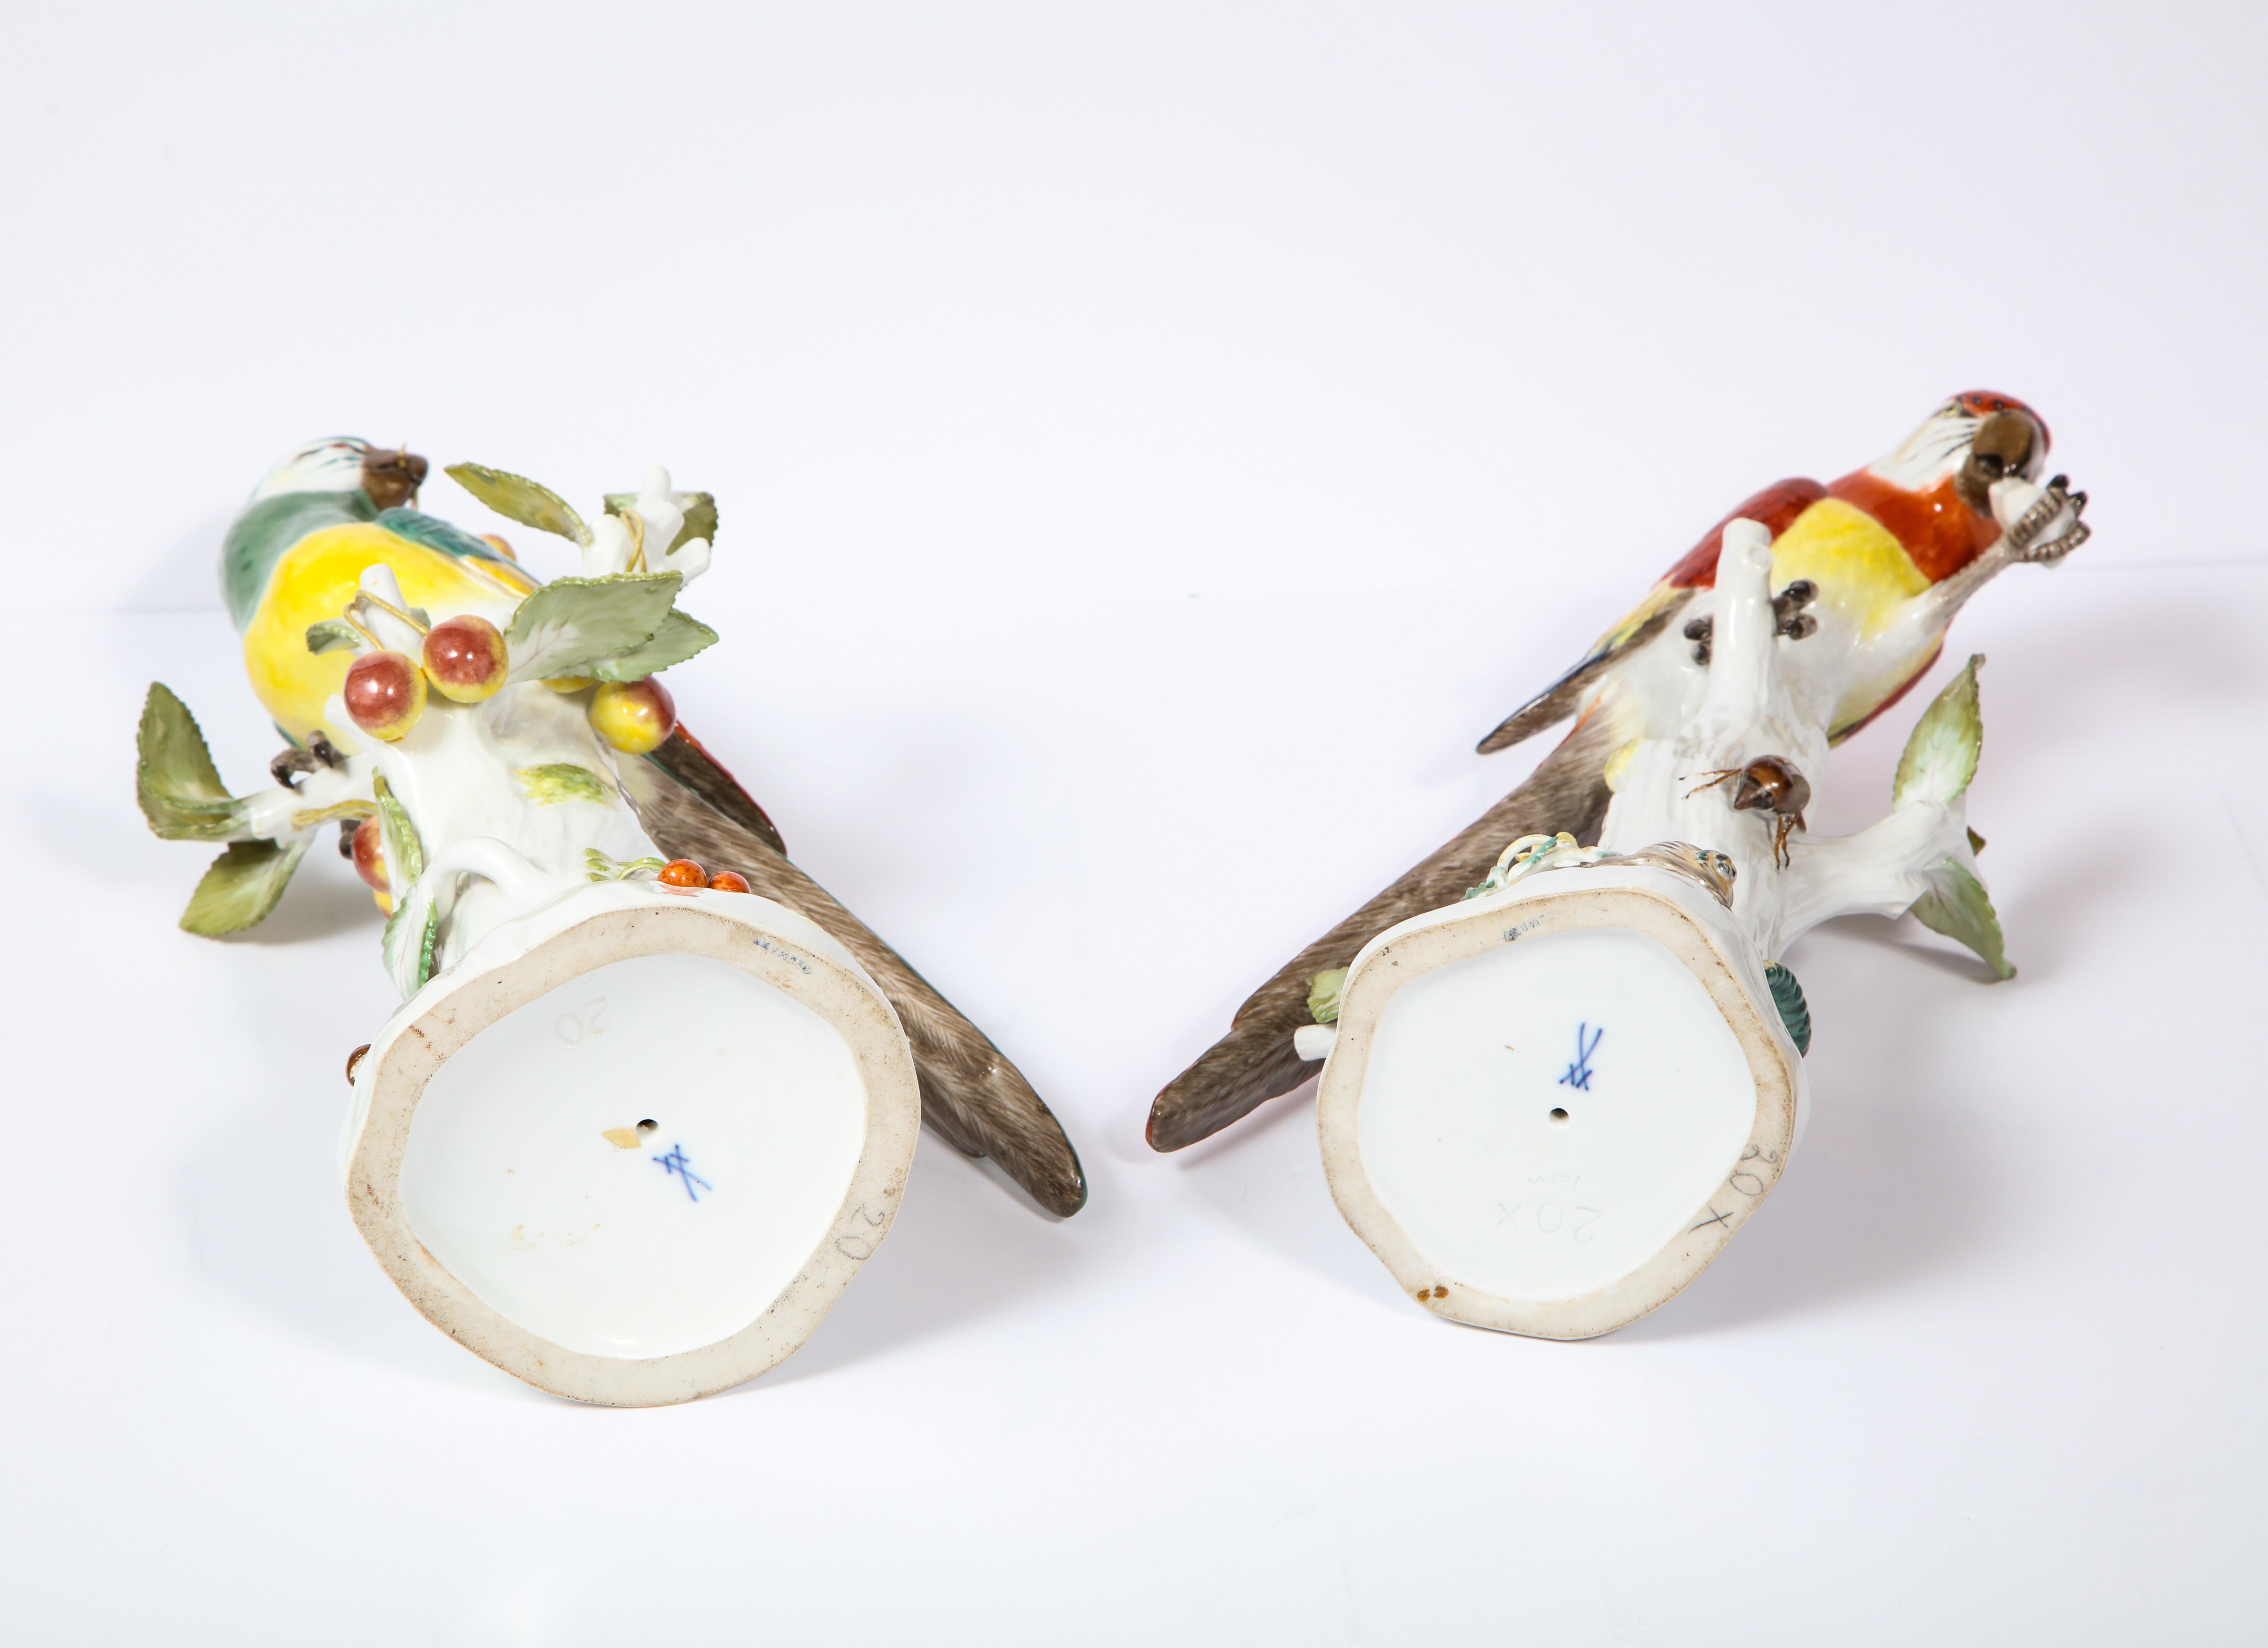 Pair of Meissen Porcelain Figures of Parrots with Cherries, Insects and Flowers 10